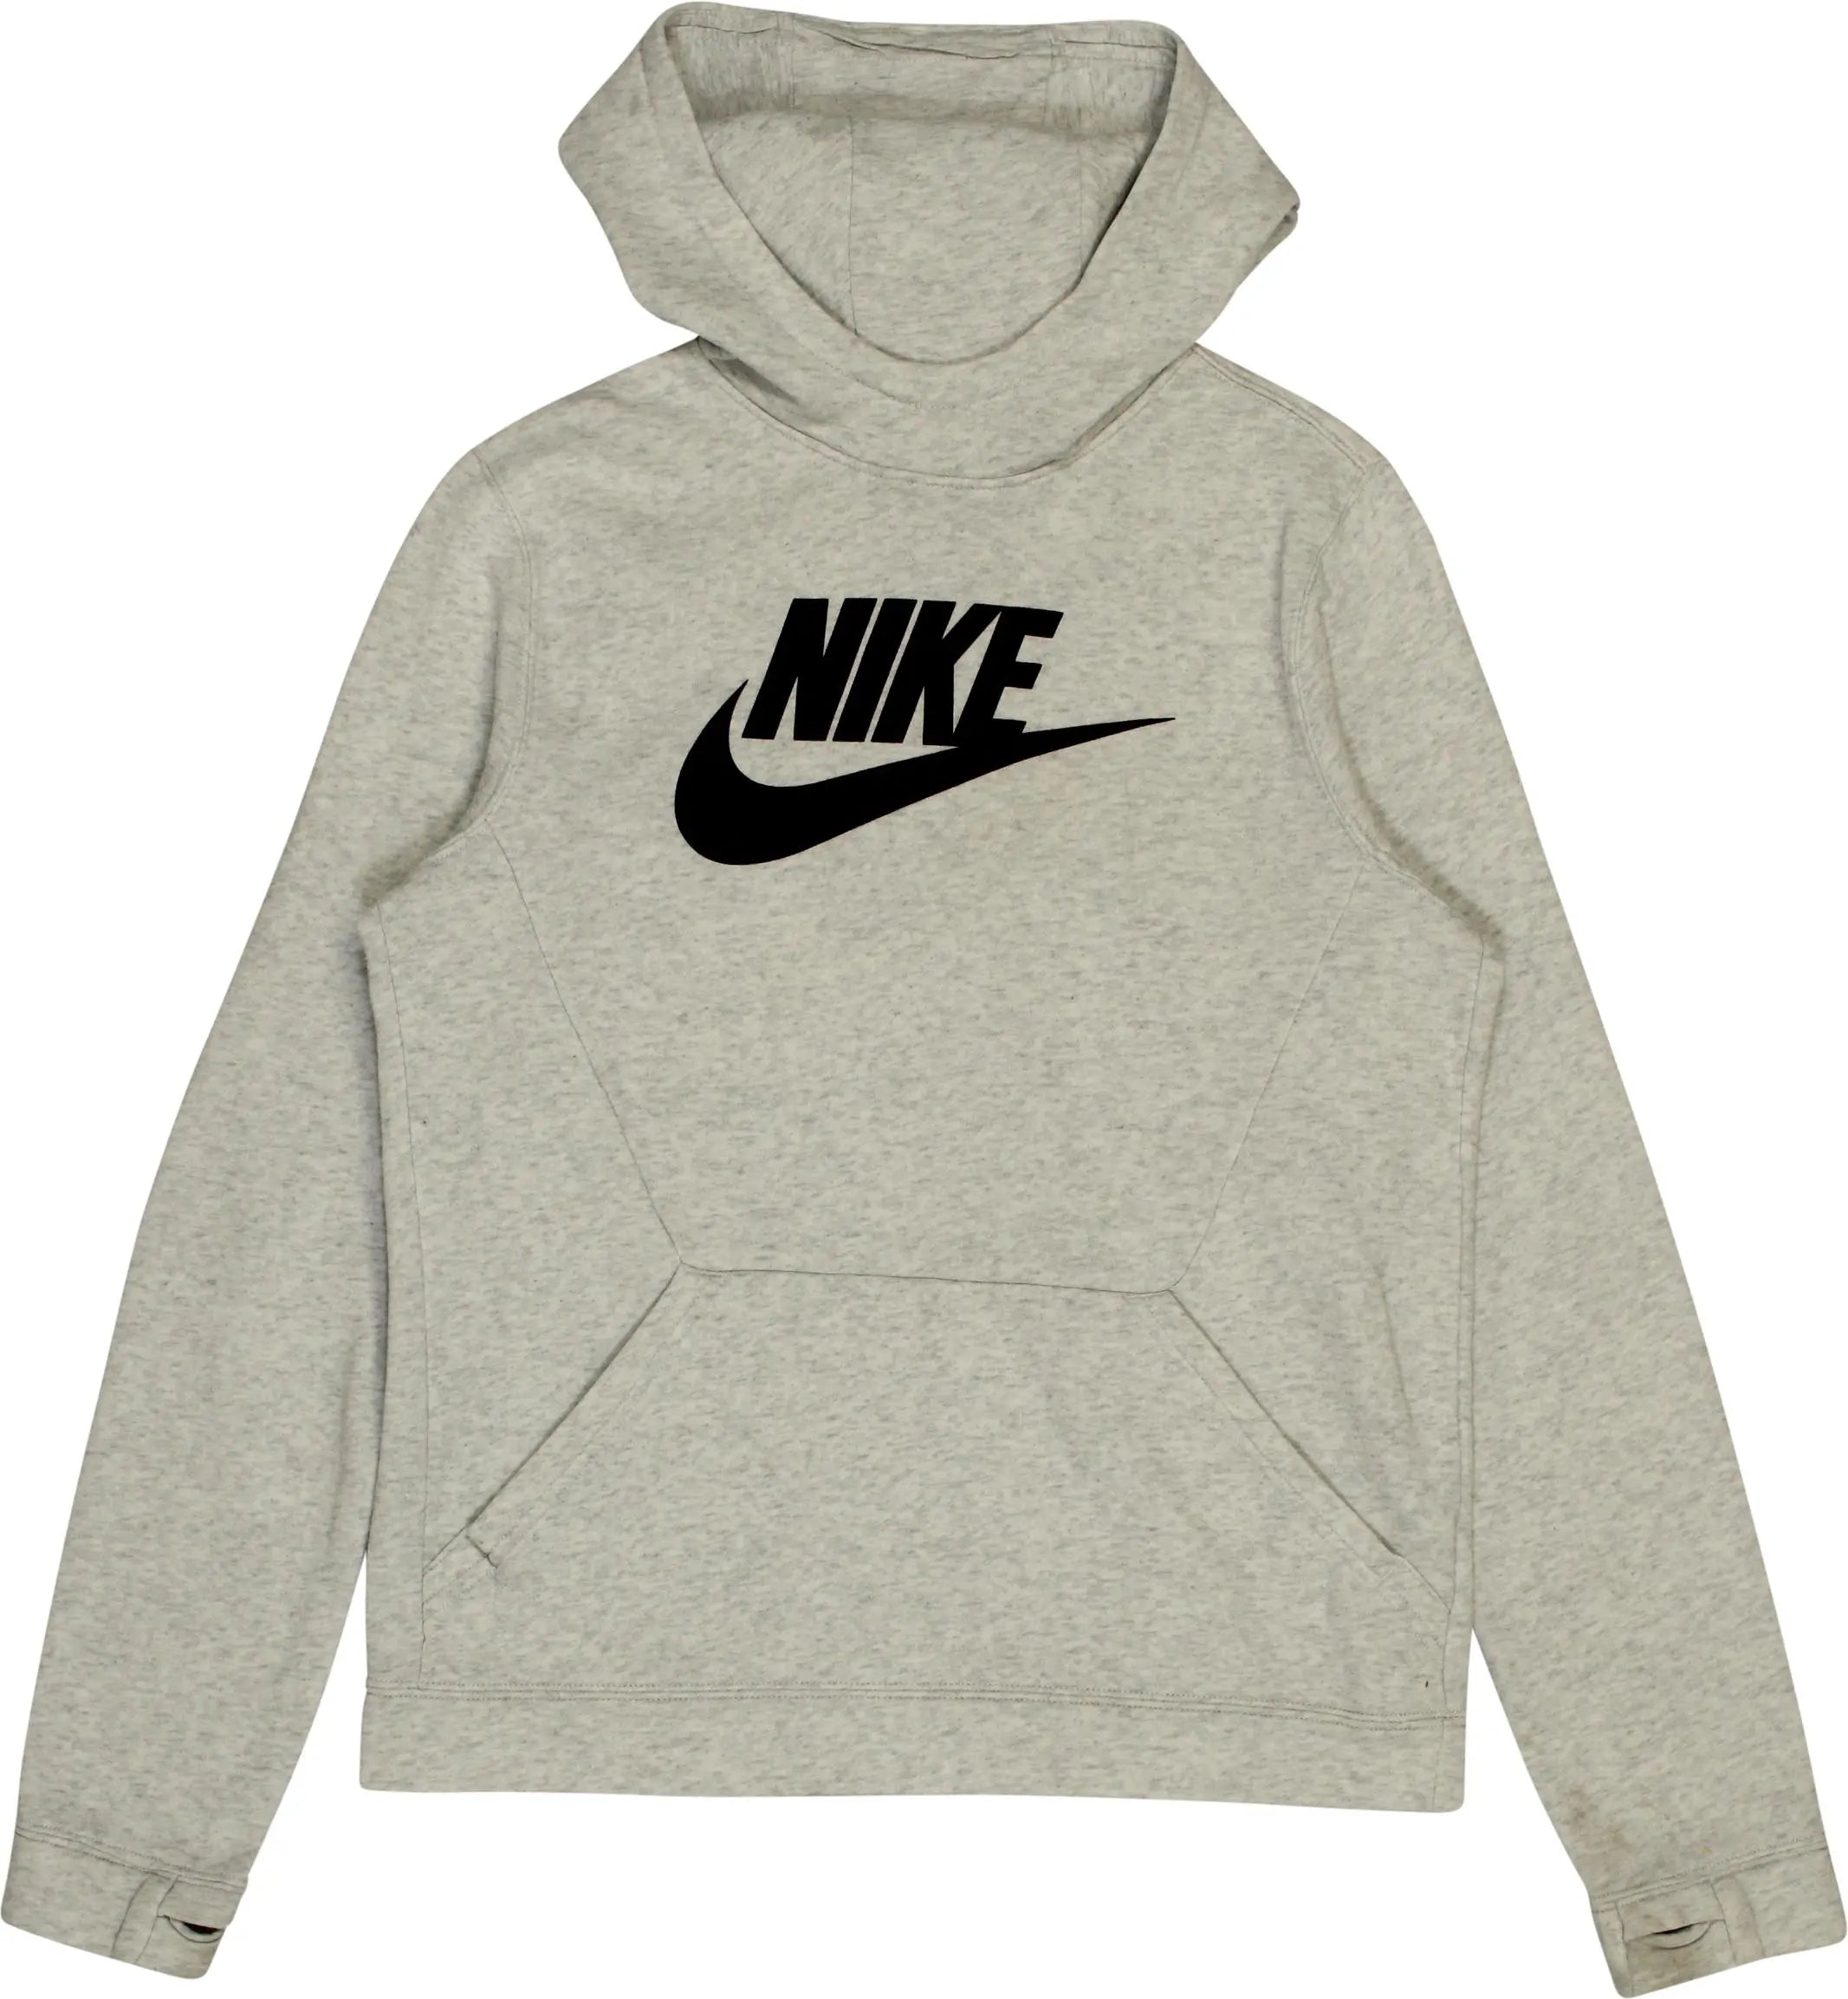 Nike - Grey Hoodie by Nike- ThriftTale.com - Vintage and second handclothing